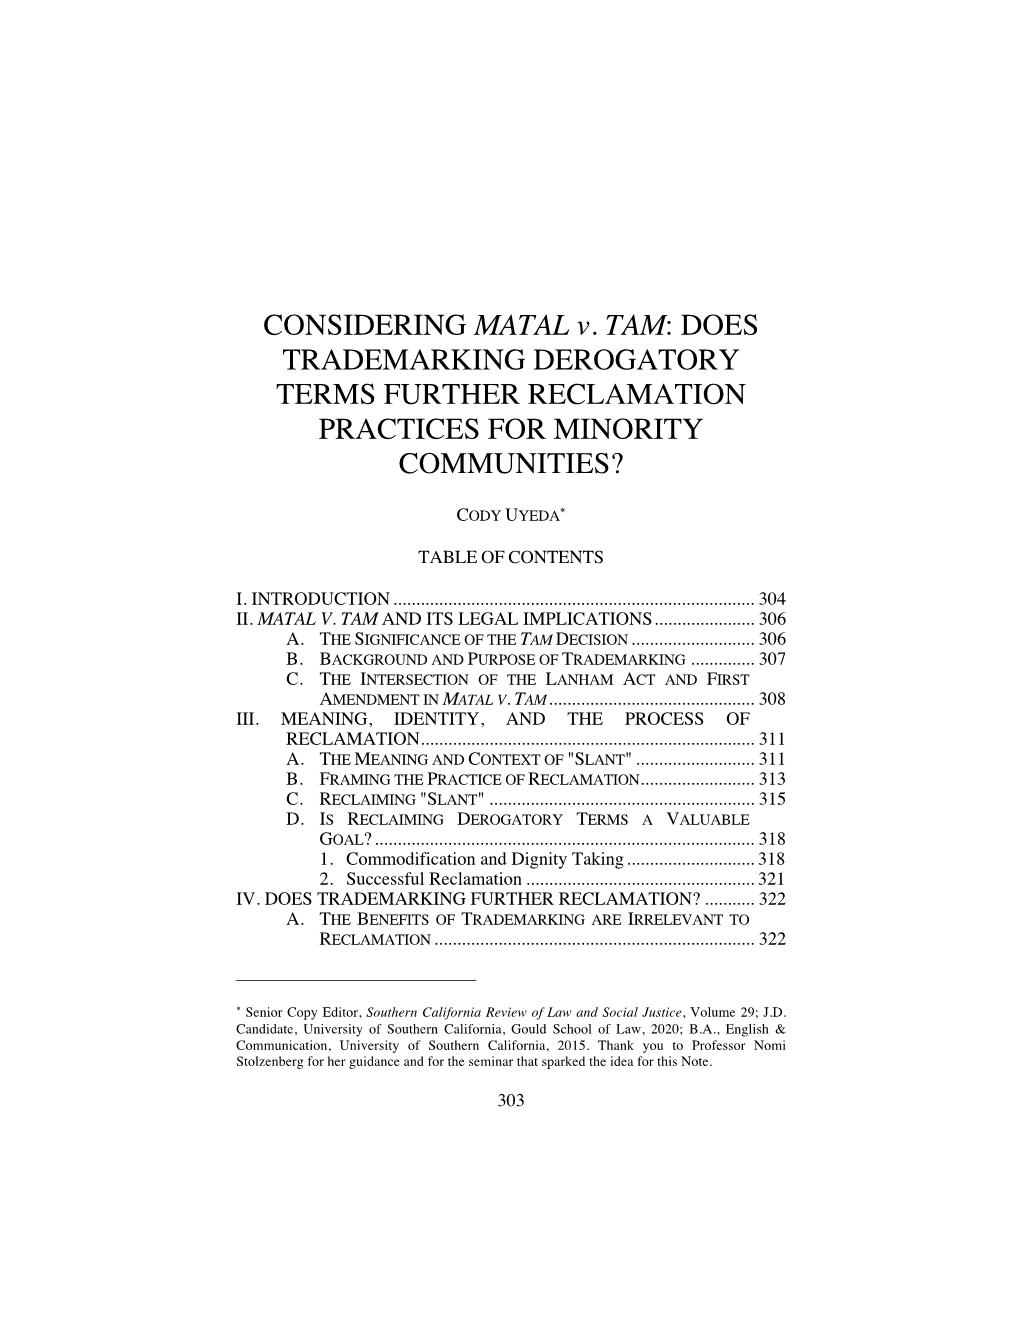 CONSIDERING MATAL V. TAM: DOES TRADEMARKING DEROGATORY TERMS FURTHER RECLAMATION PRACTICES for MINORITY COMMUNITIES?